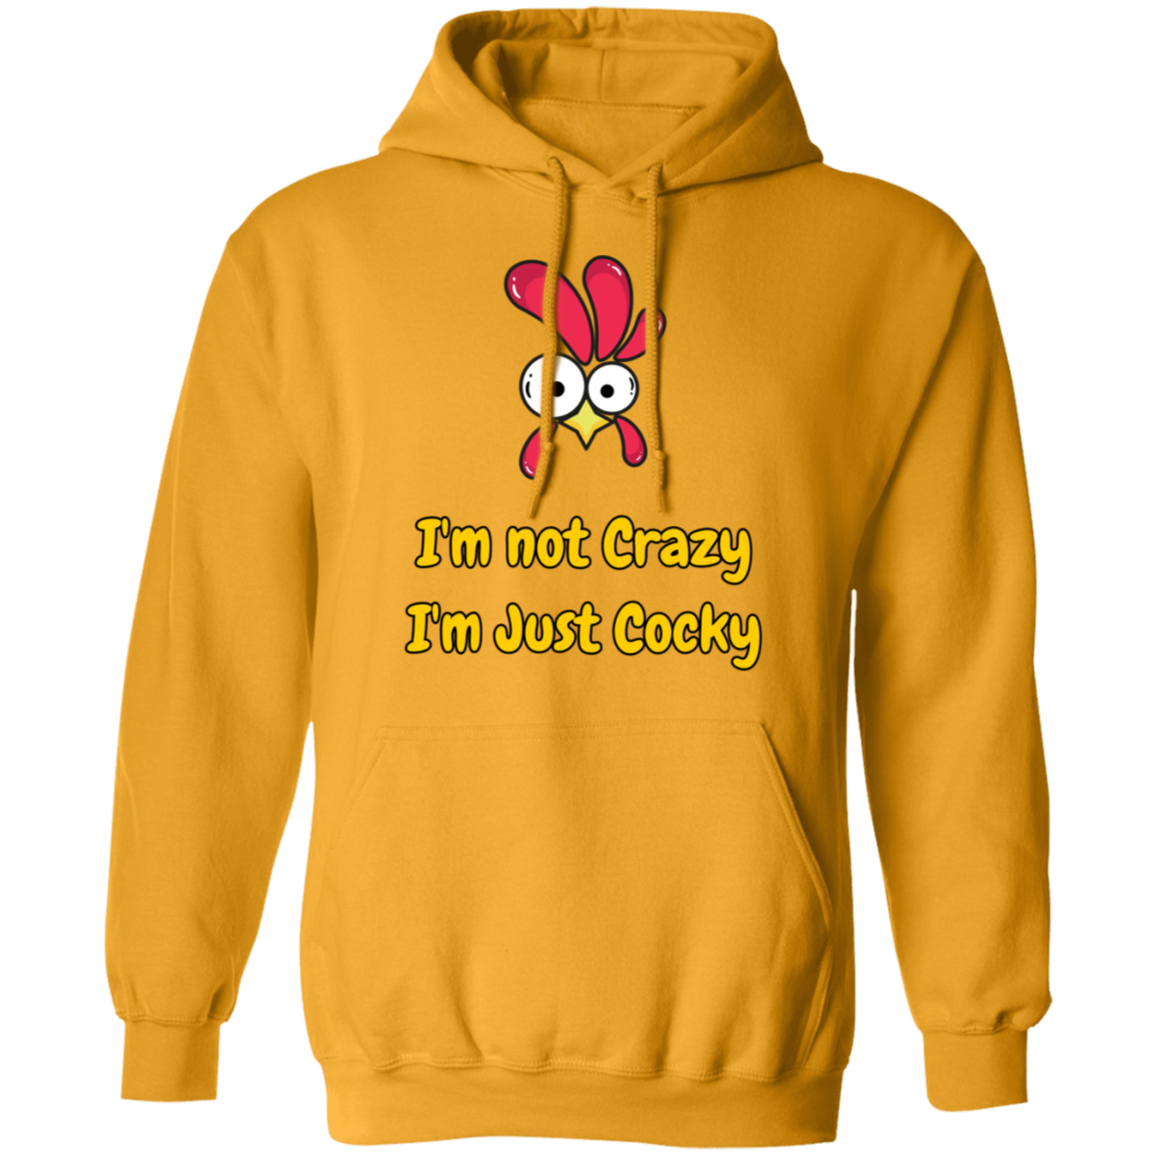 I'm Not Crazy, I'm Just Cocky - Men's Pullover Hoodie